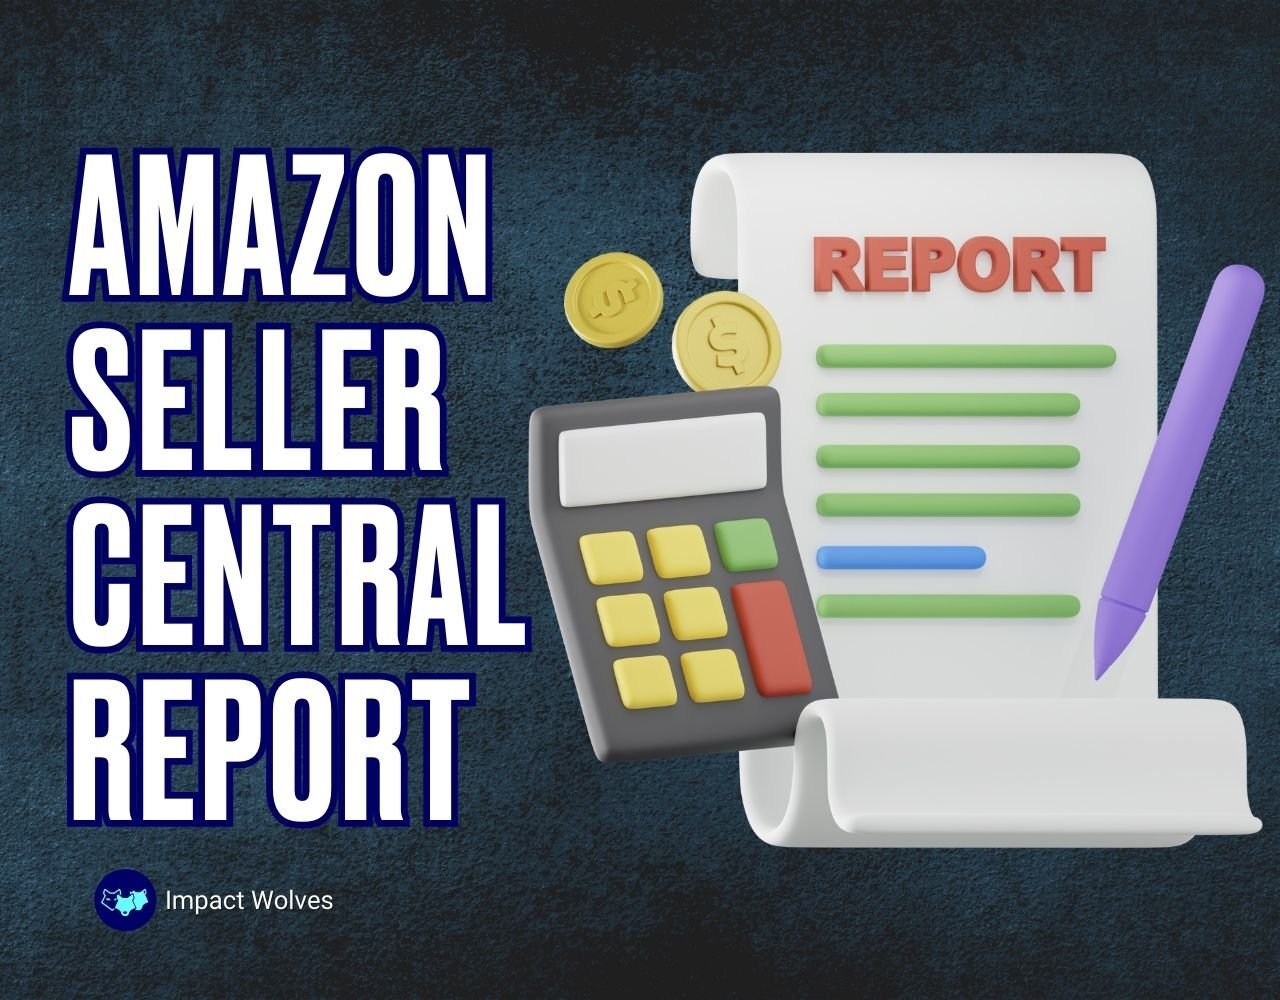 amazon seller central report